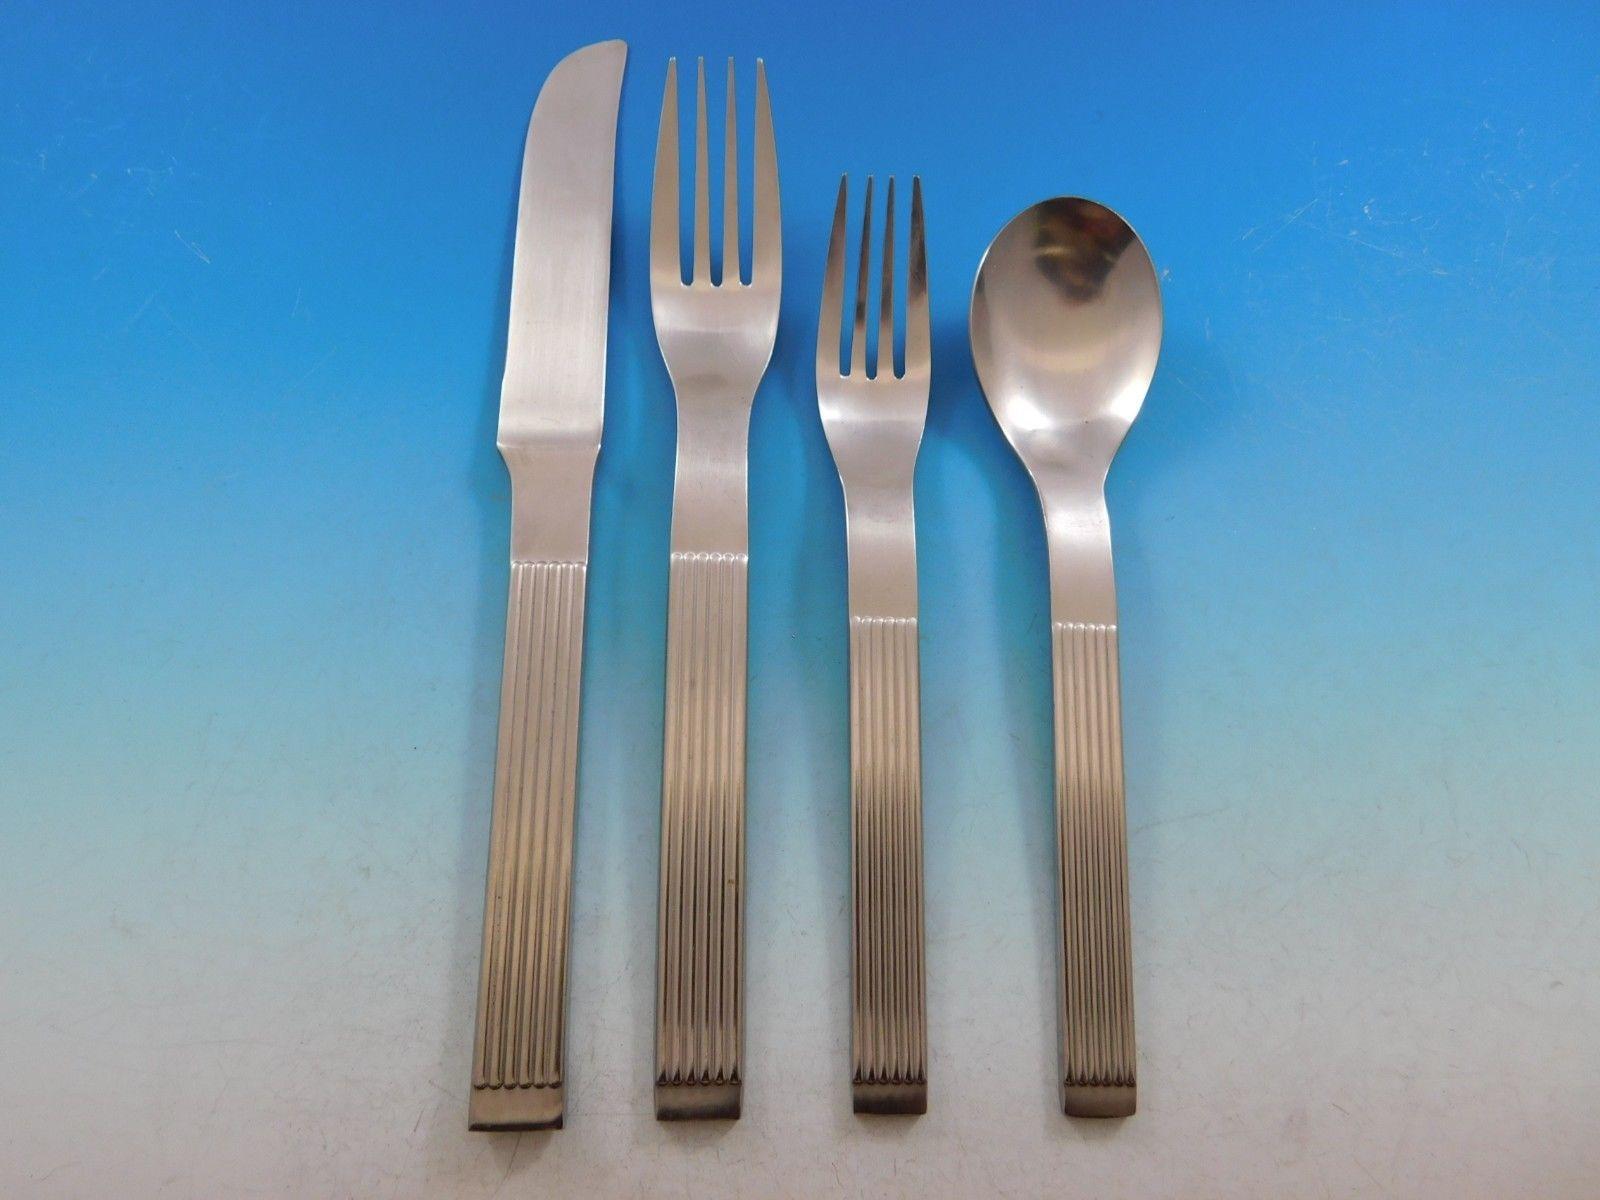 Thebe by Dansk Stainless flatware set - 20 pieces. This estate set includes:

4 dinner knives, 8 1/2